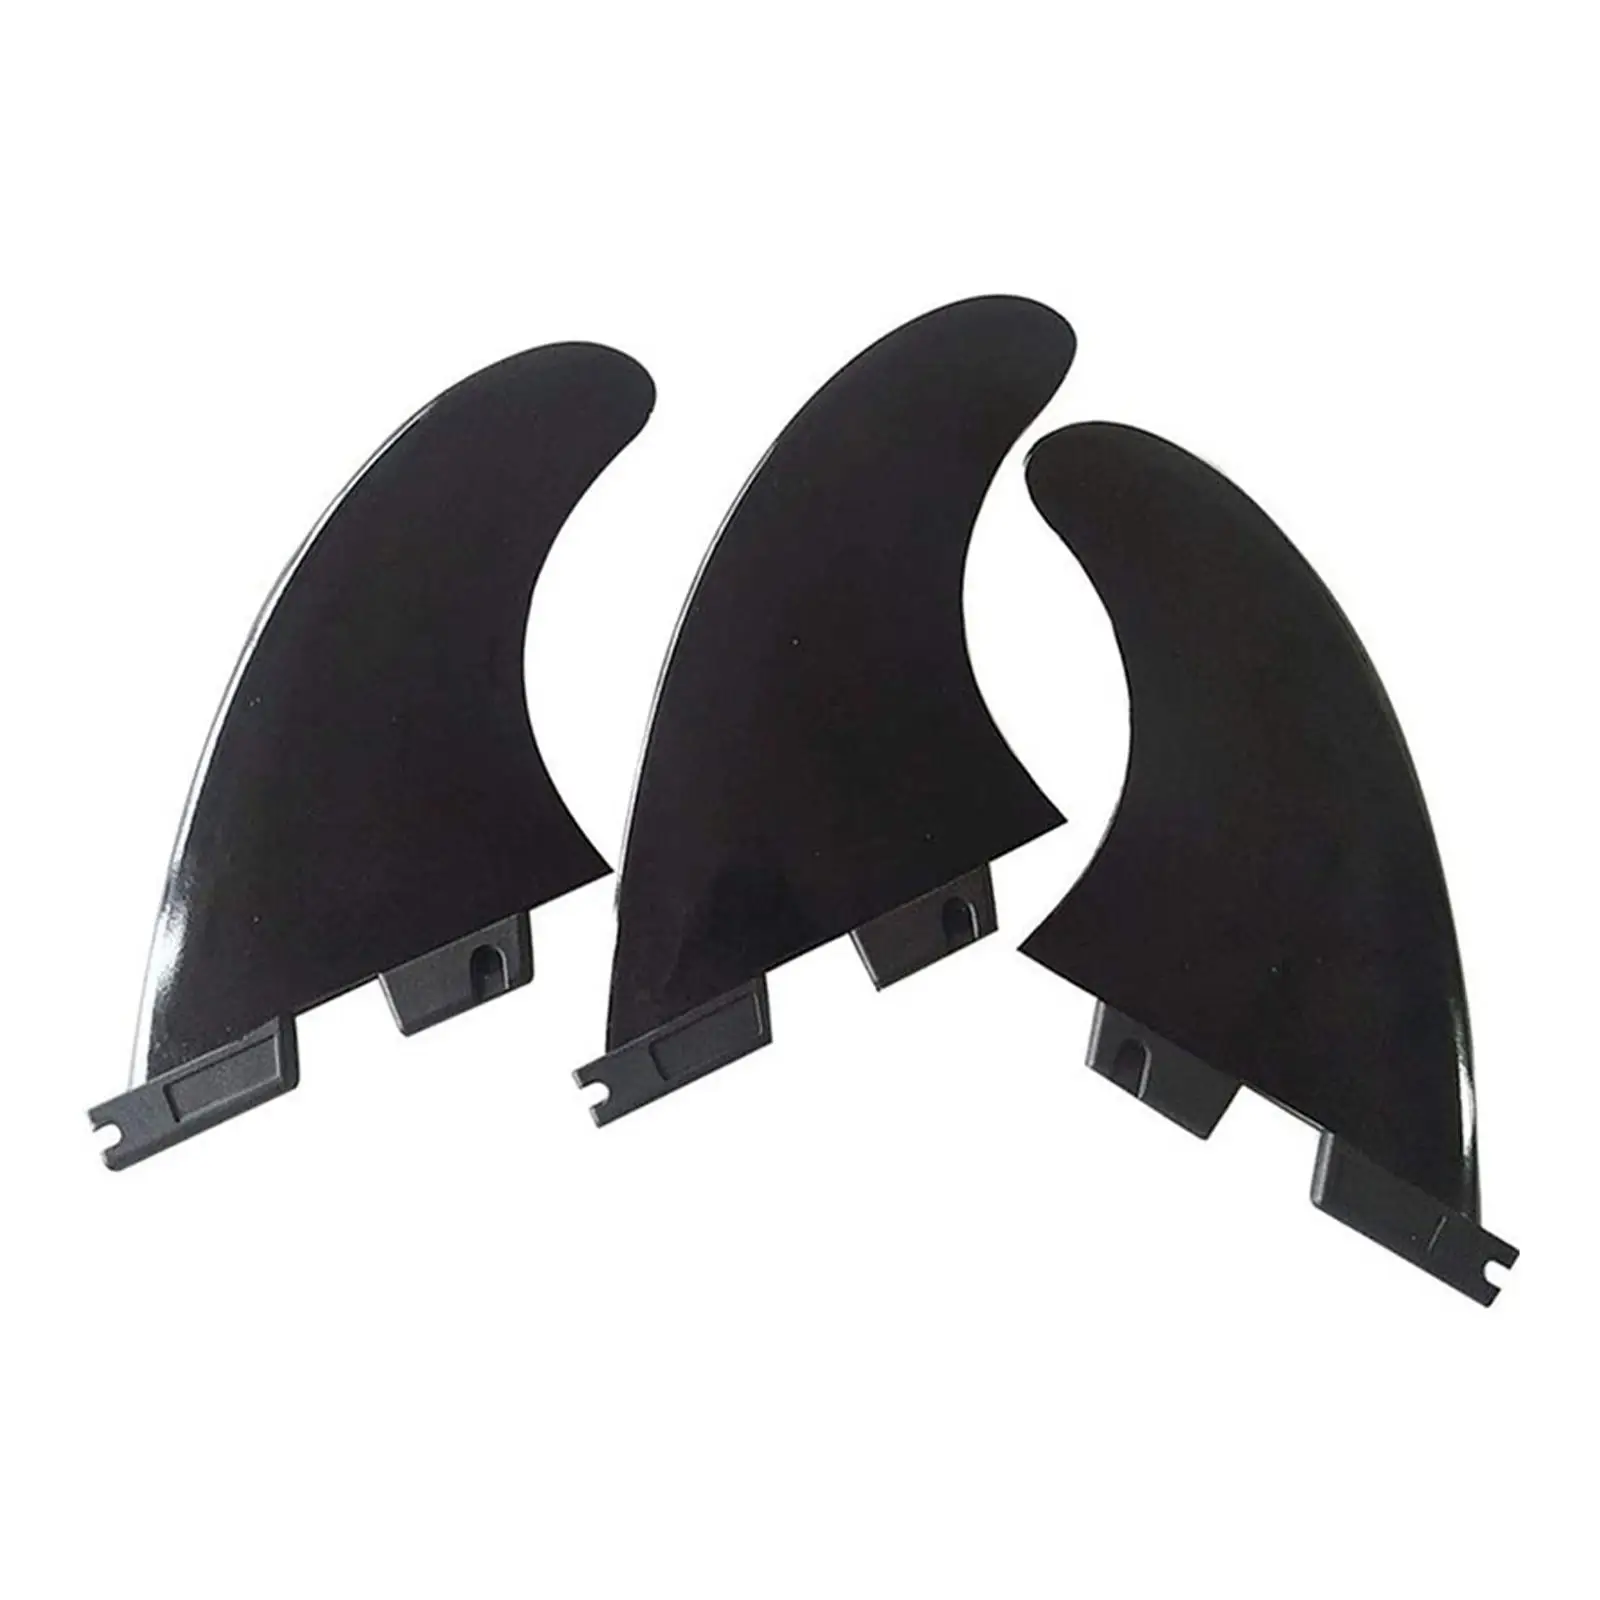 3Pcs Surfboard Fins Detachable Quick Release Surfing Fin Paddleboard Fin for